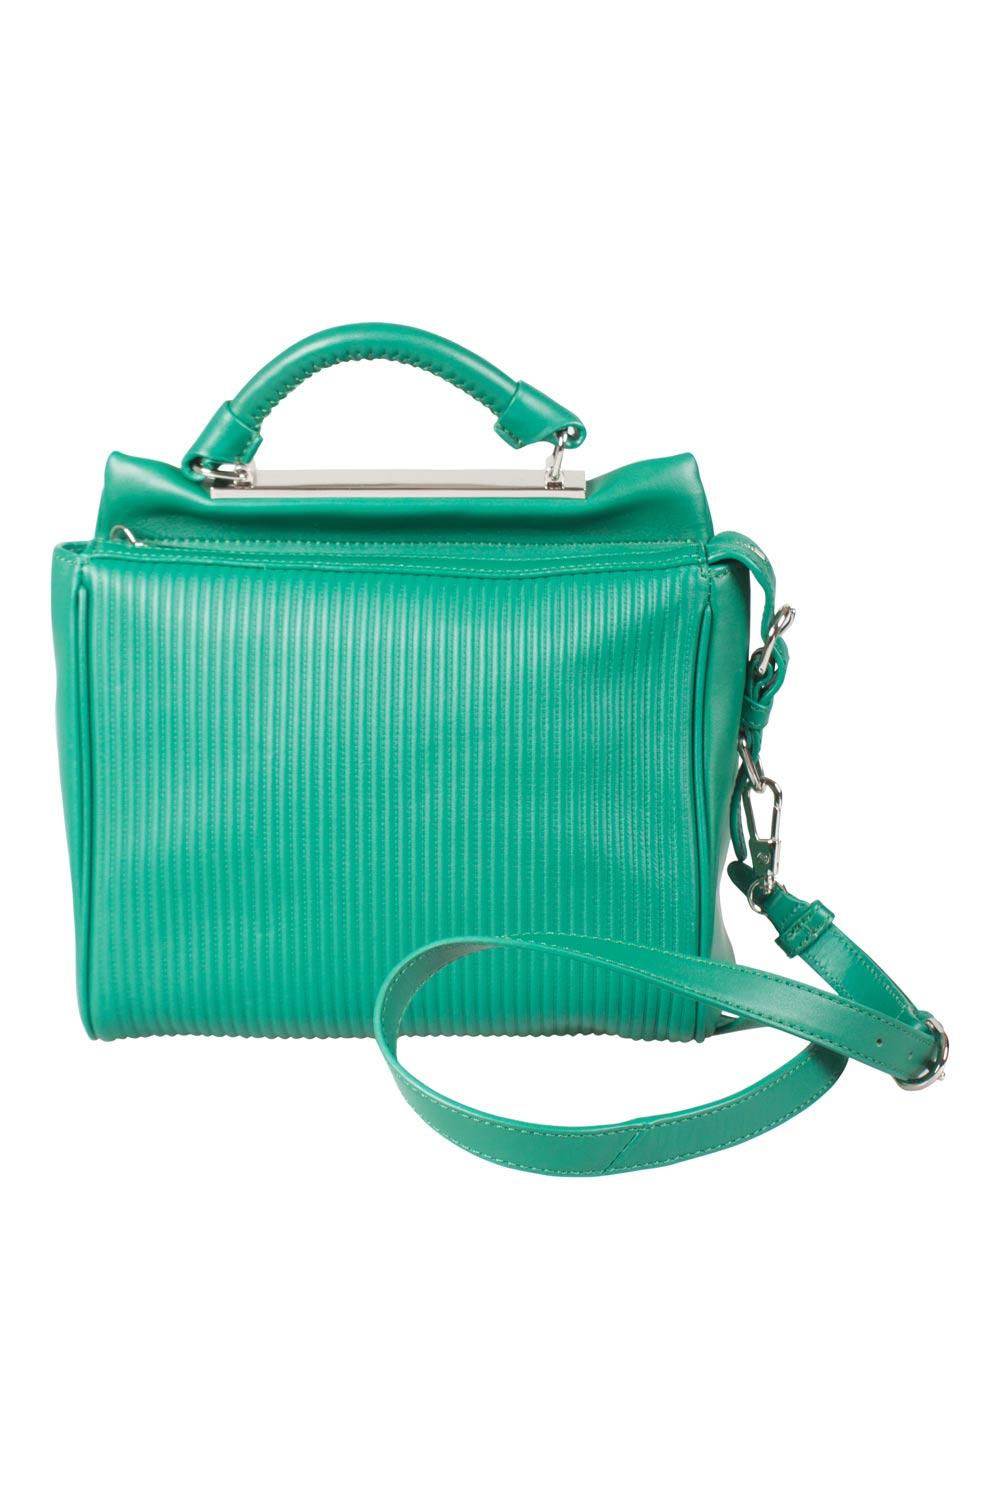 Women's 3.1 Philip Lim Green Leather Ryder Top Handle Bag